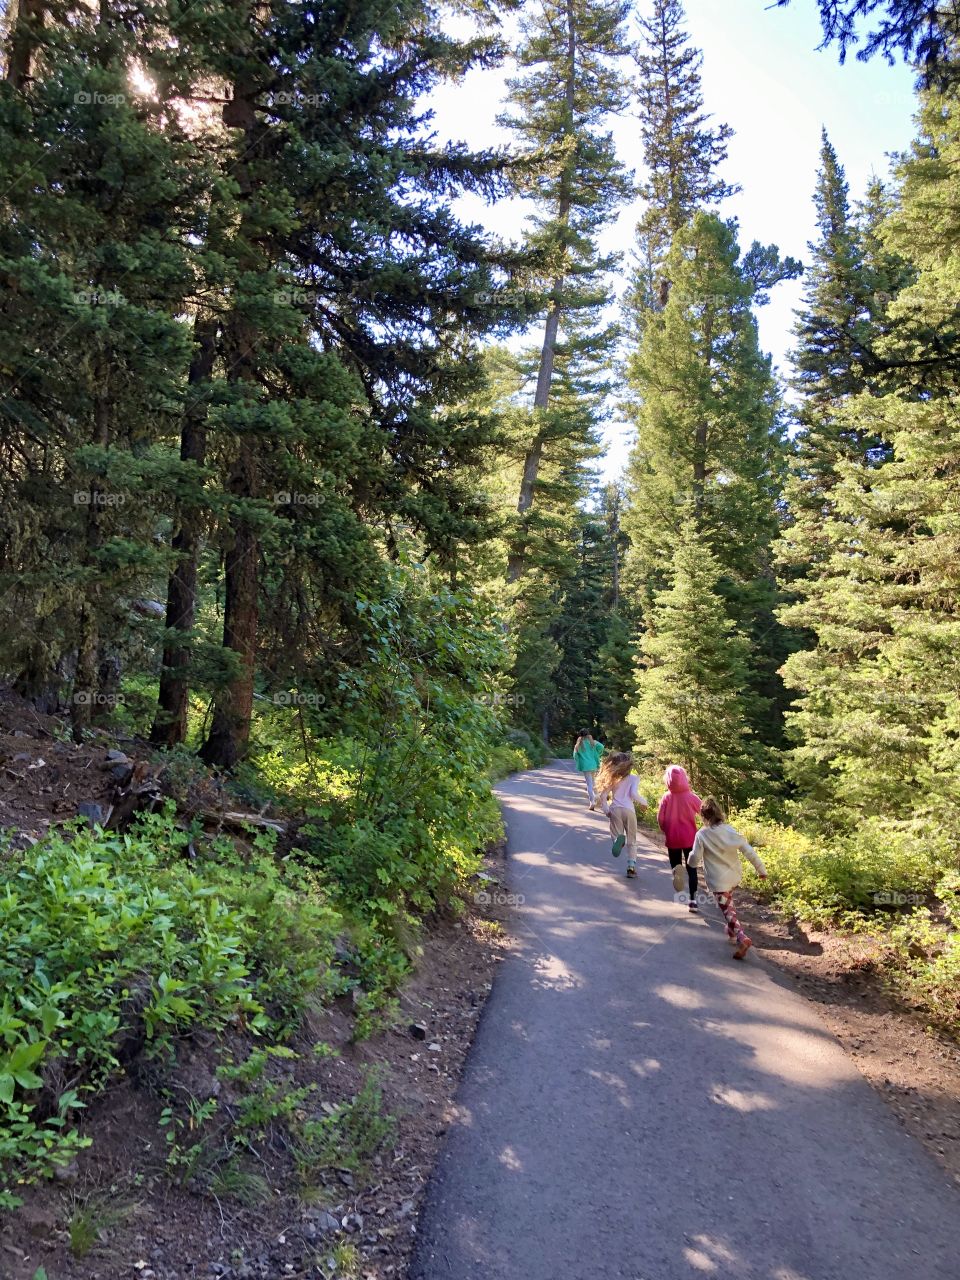 Children running on a paved trail in a forest